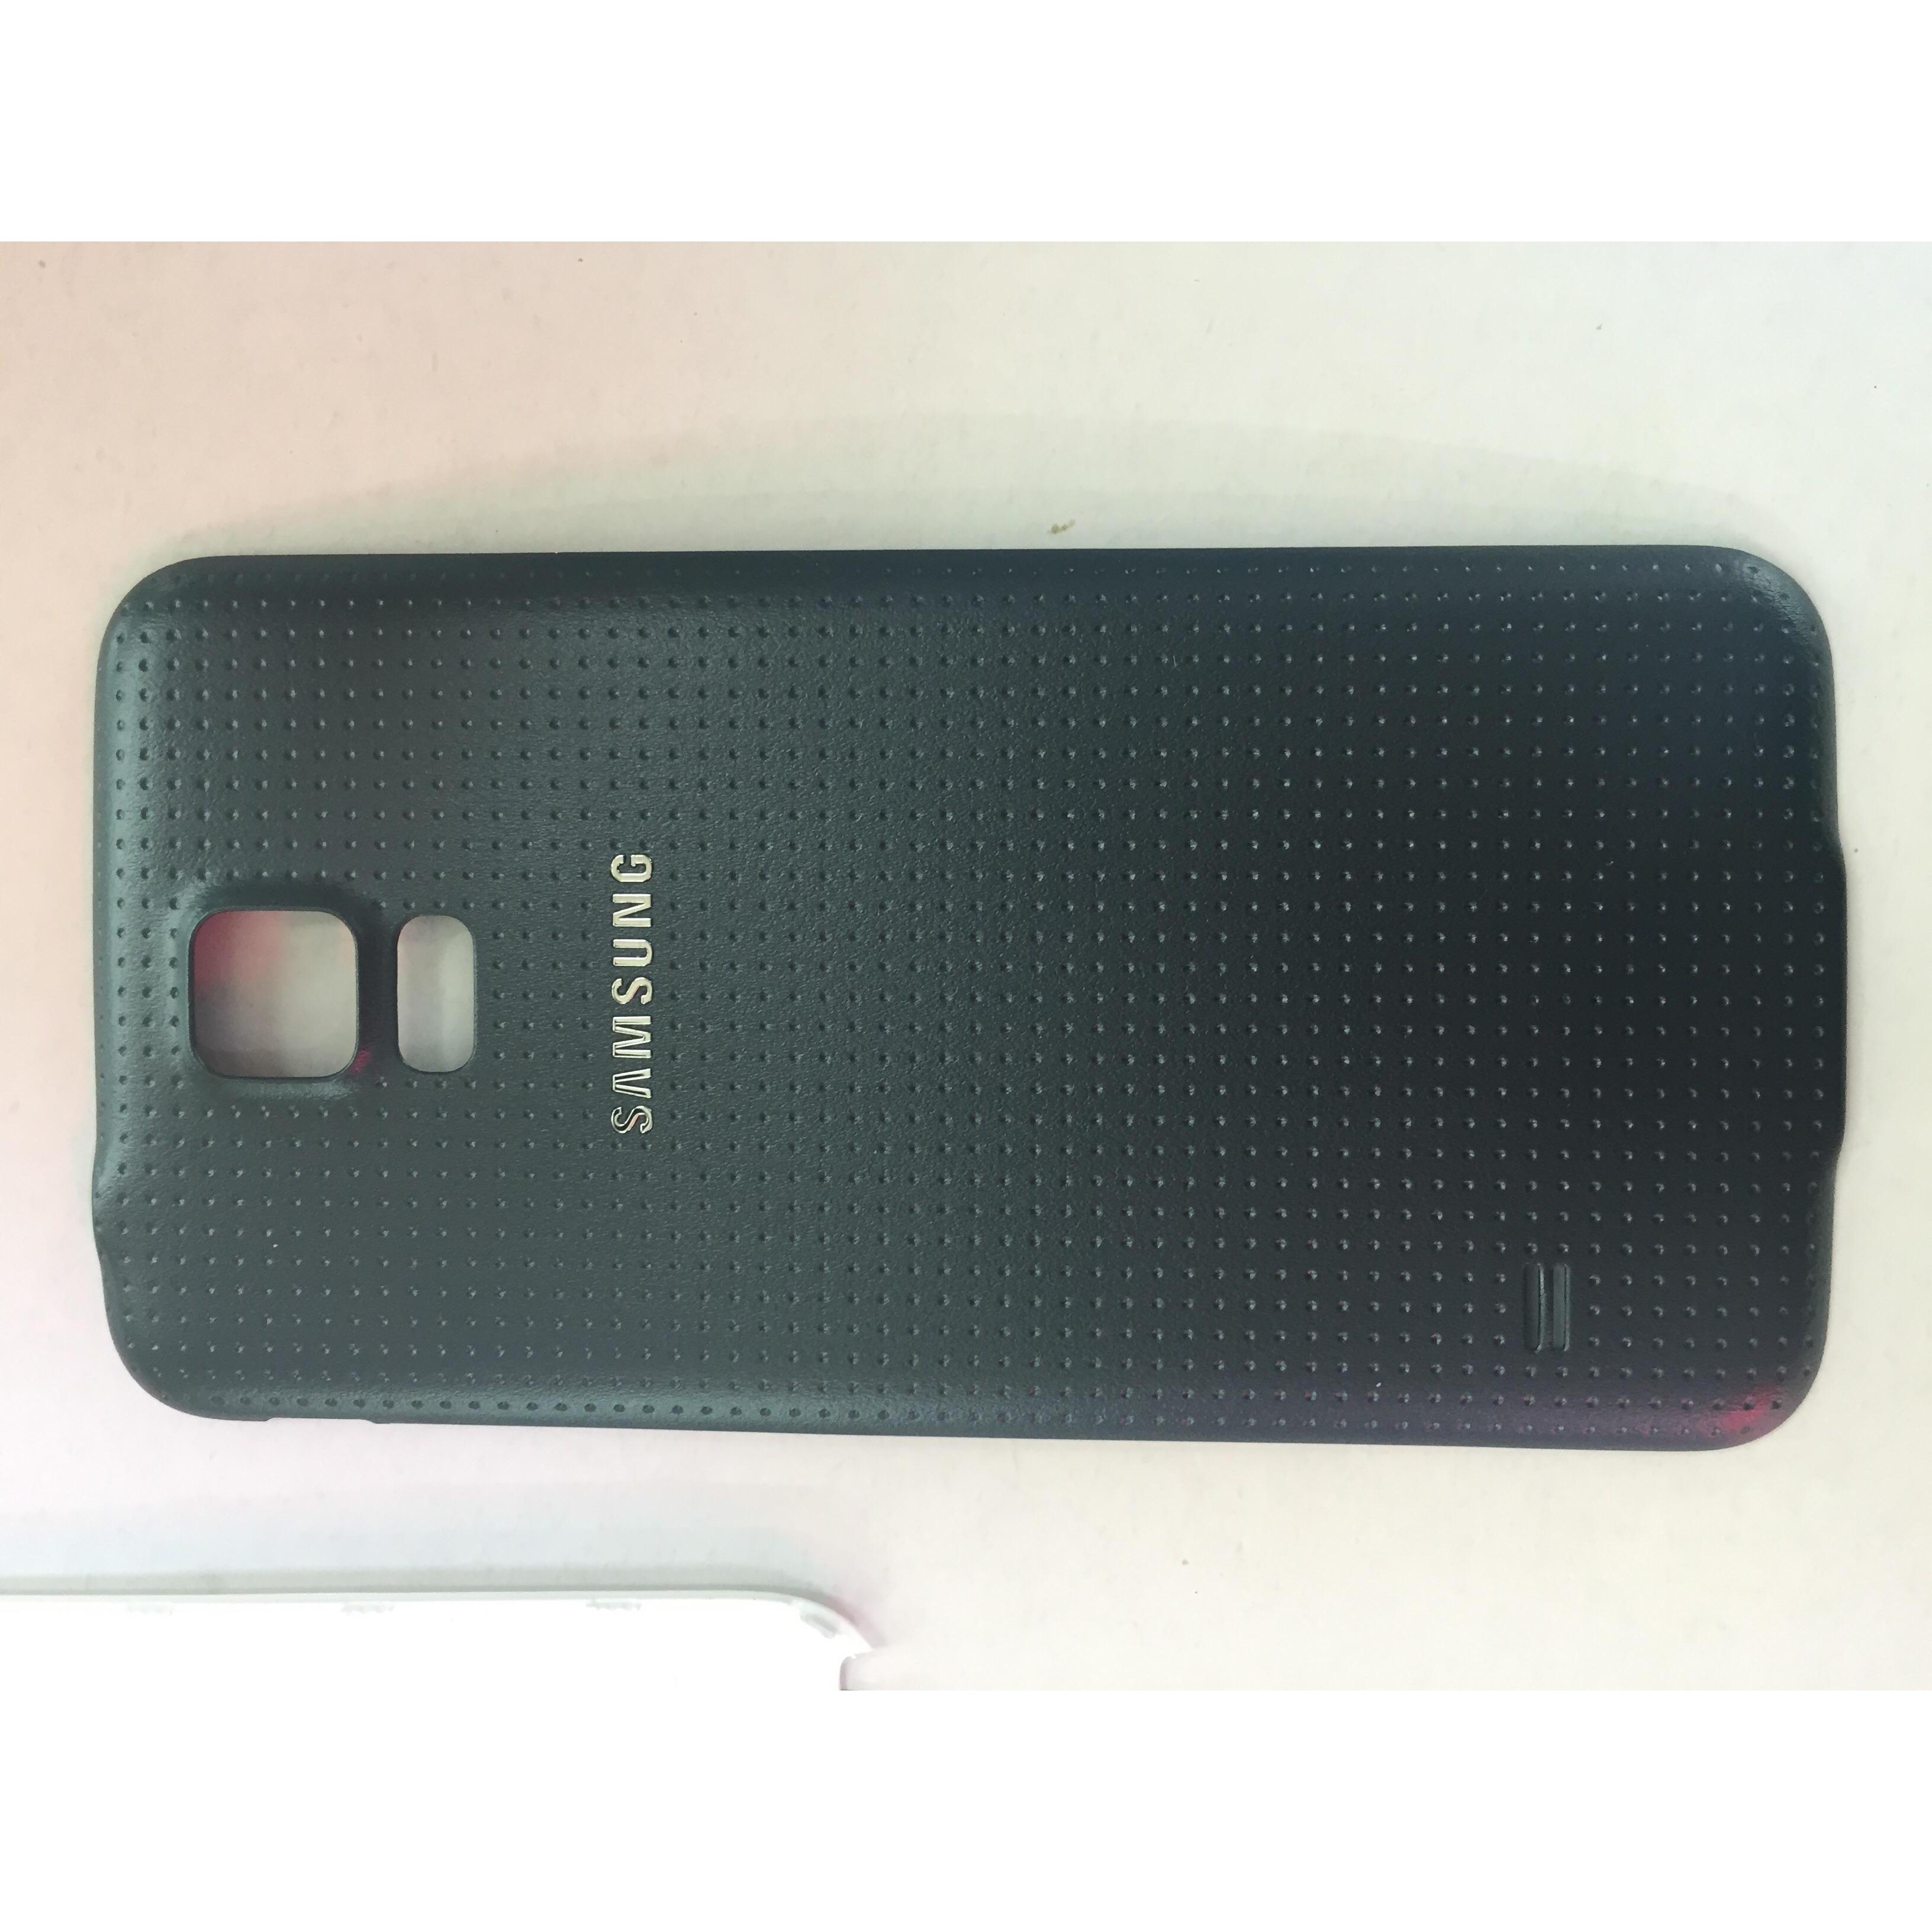 Samsung S5 cover Wholesale Suppliers